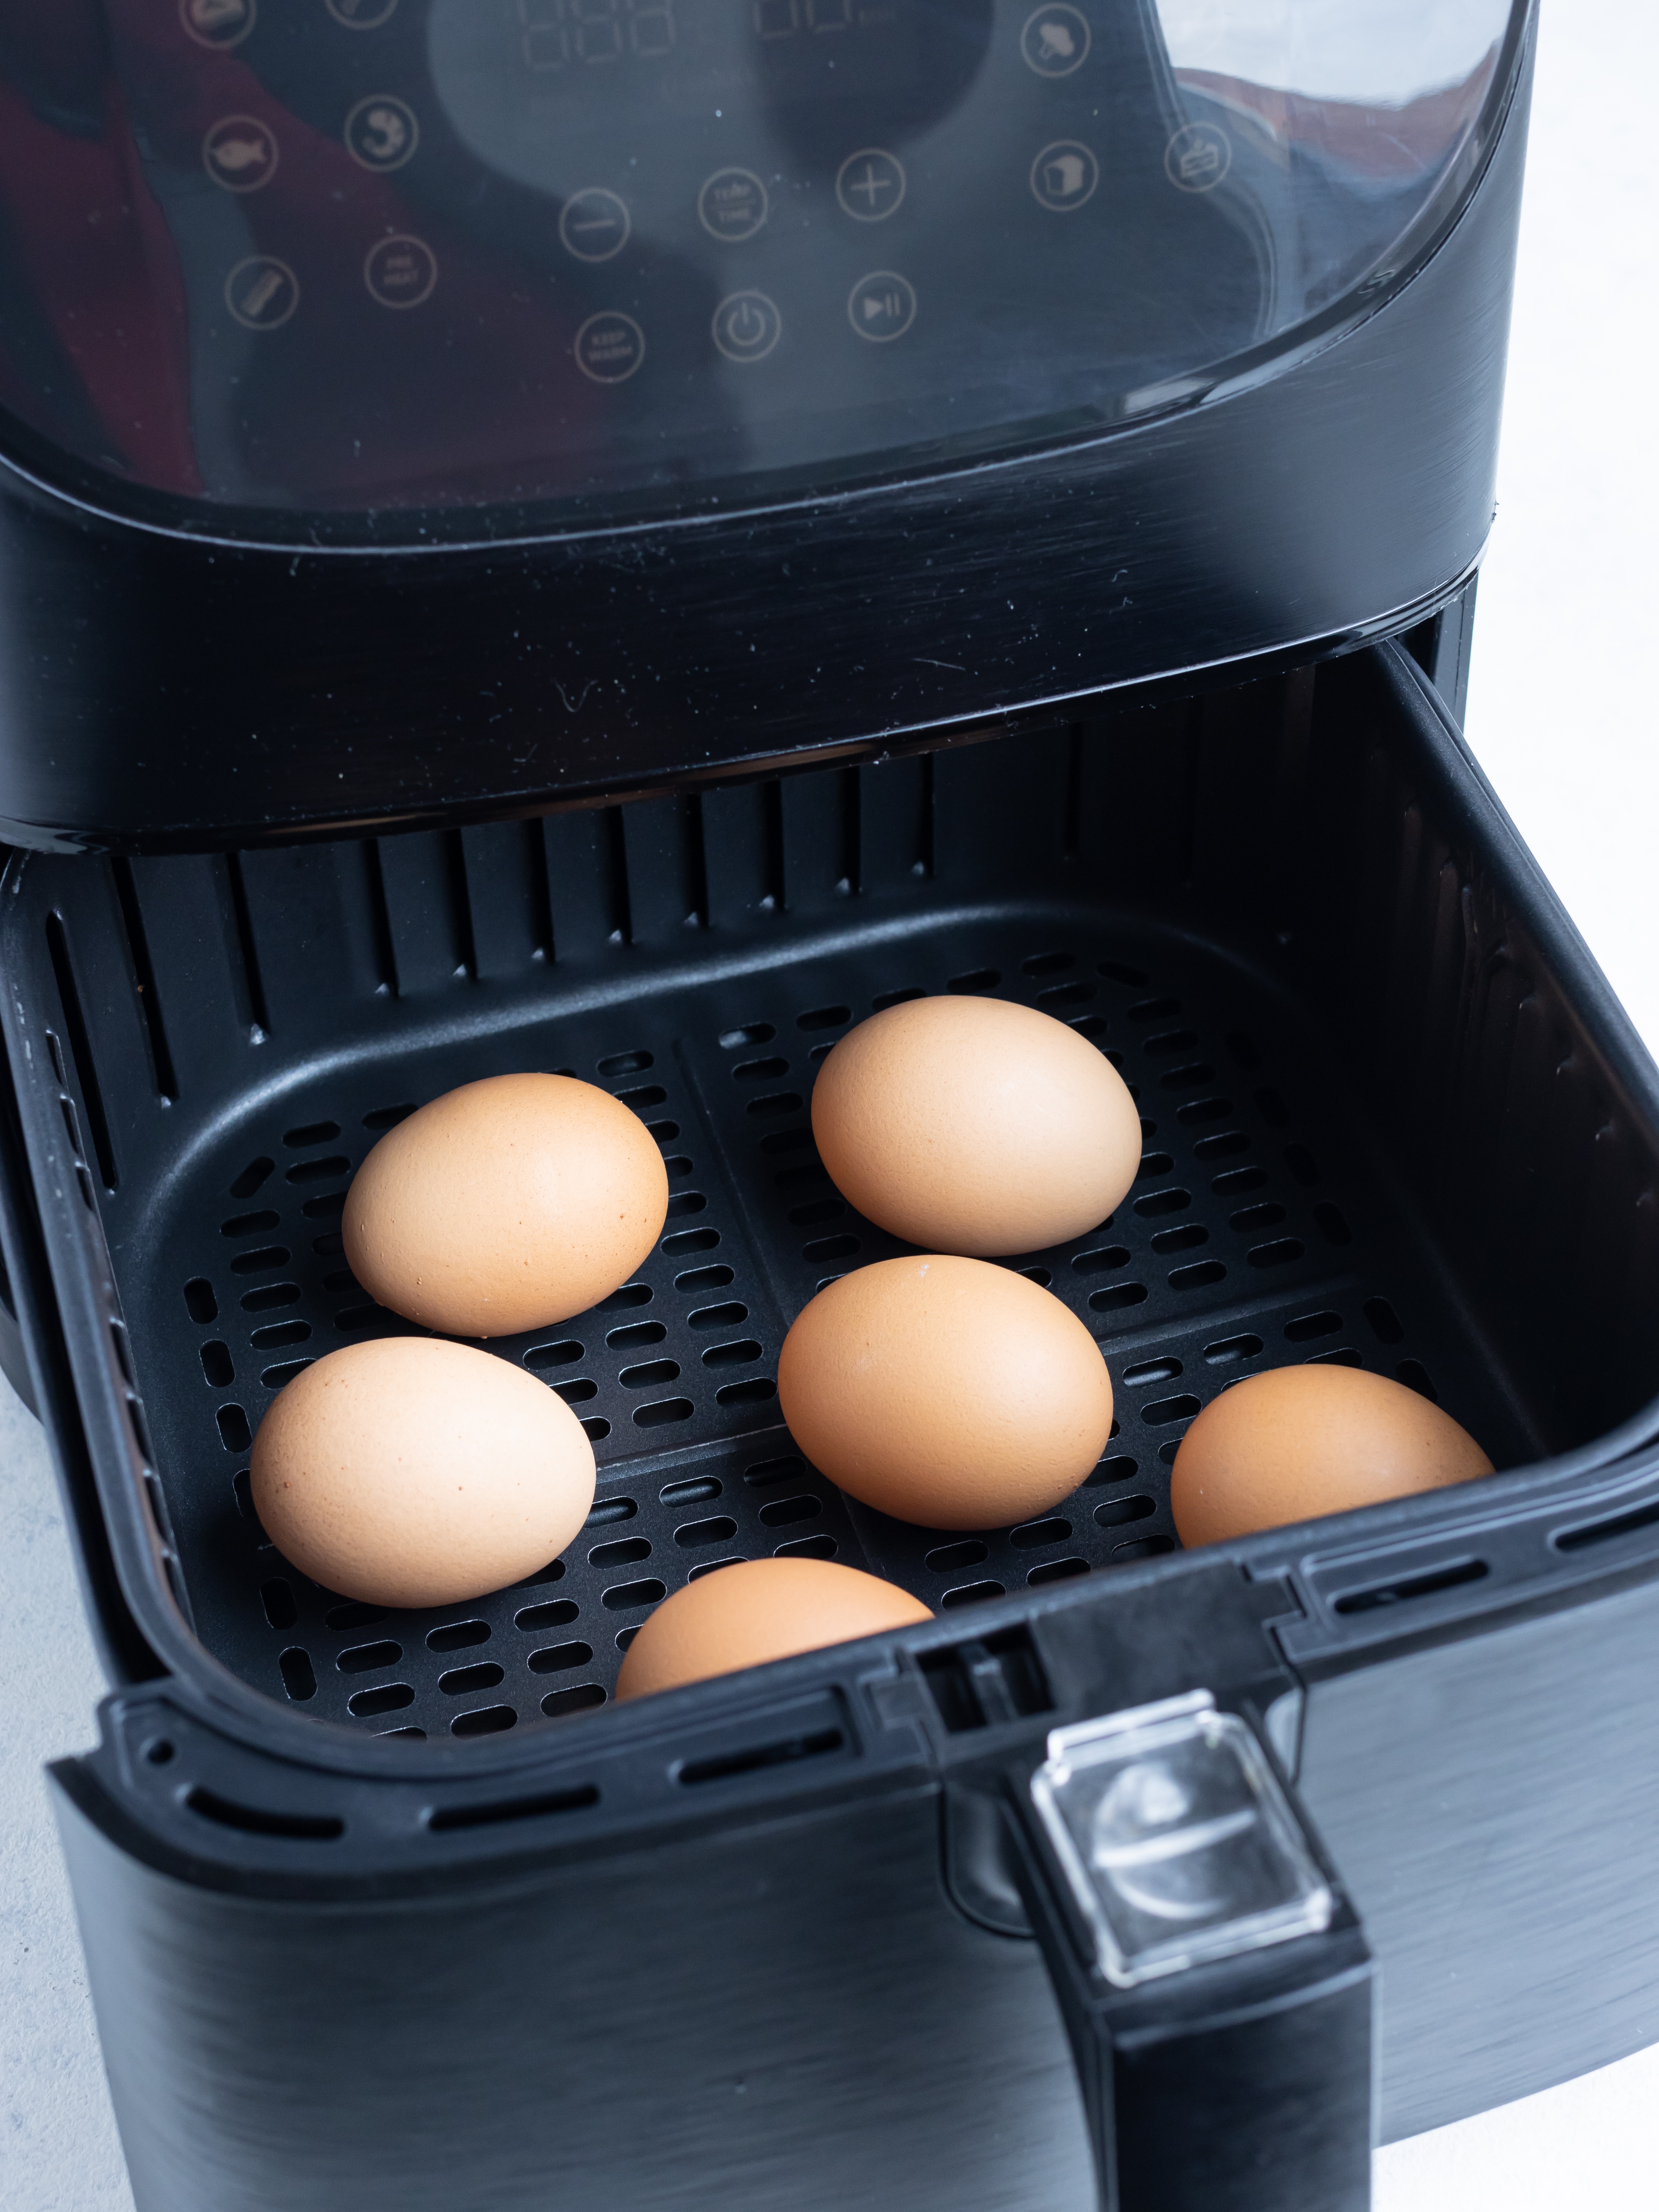 Eggs are laid in one layer in the air fryer.